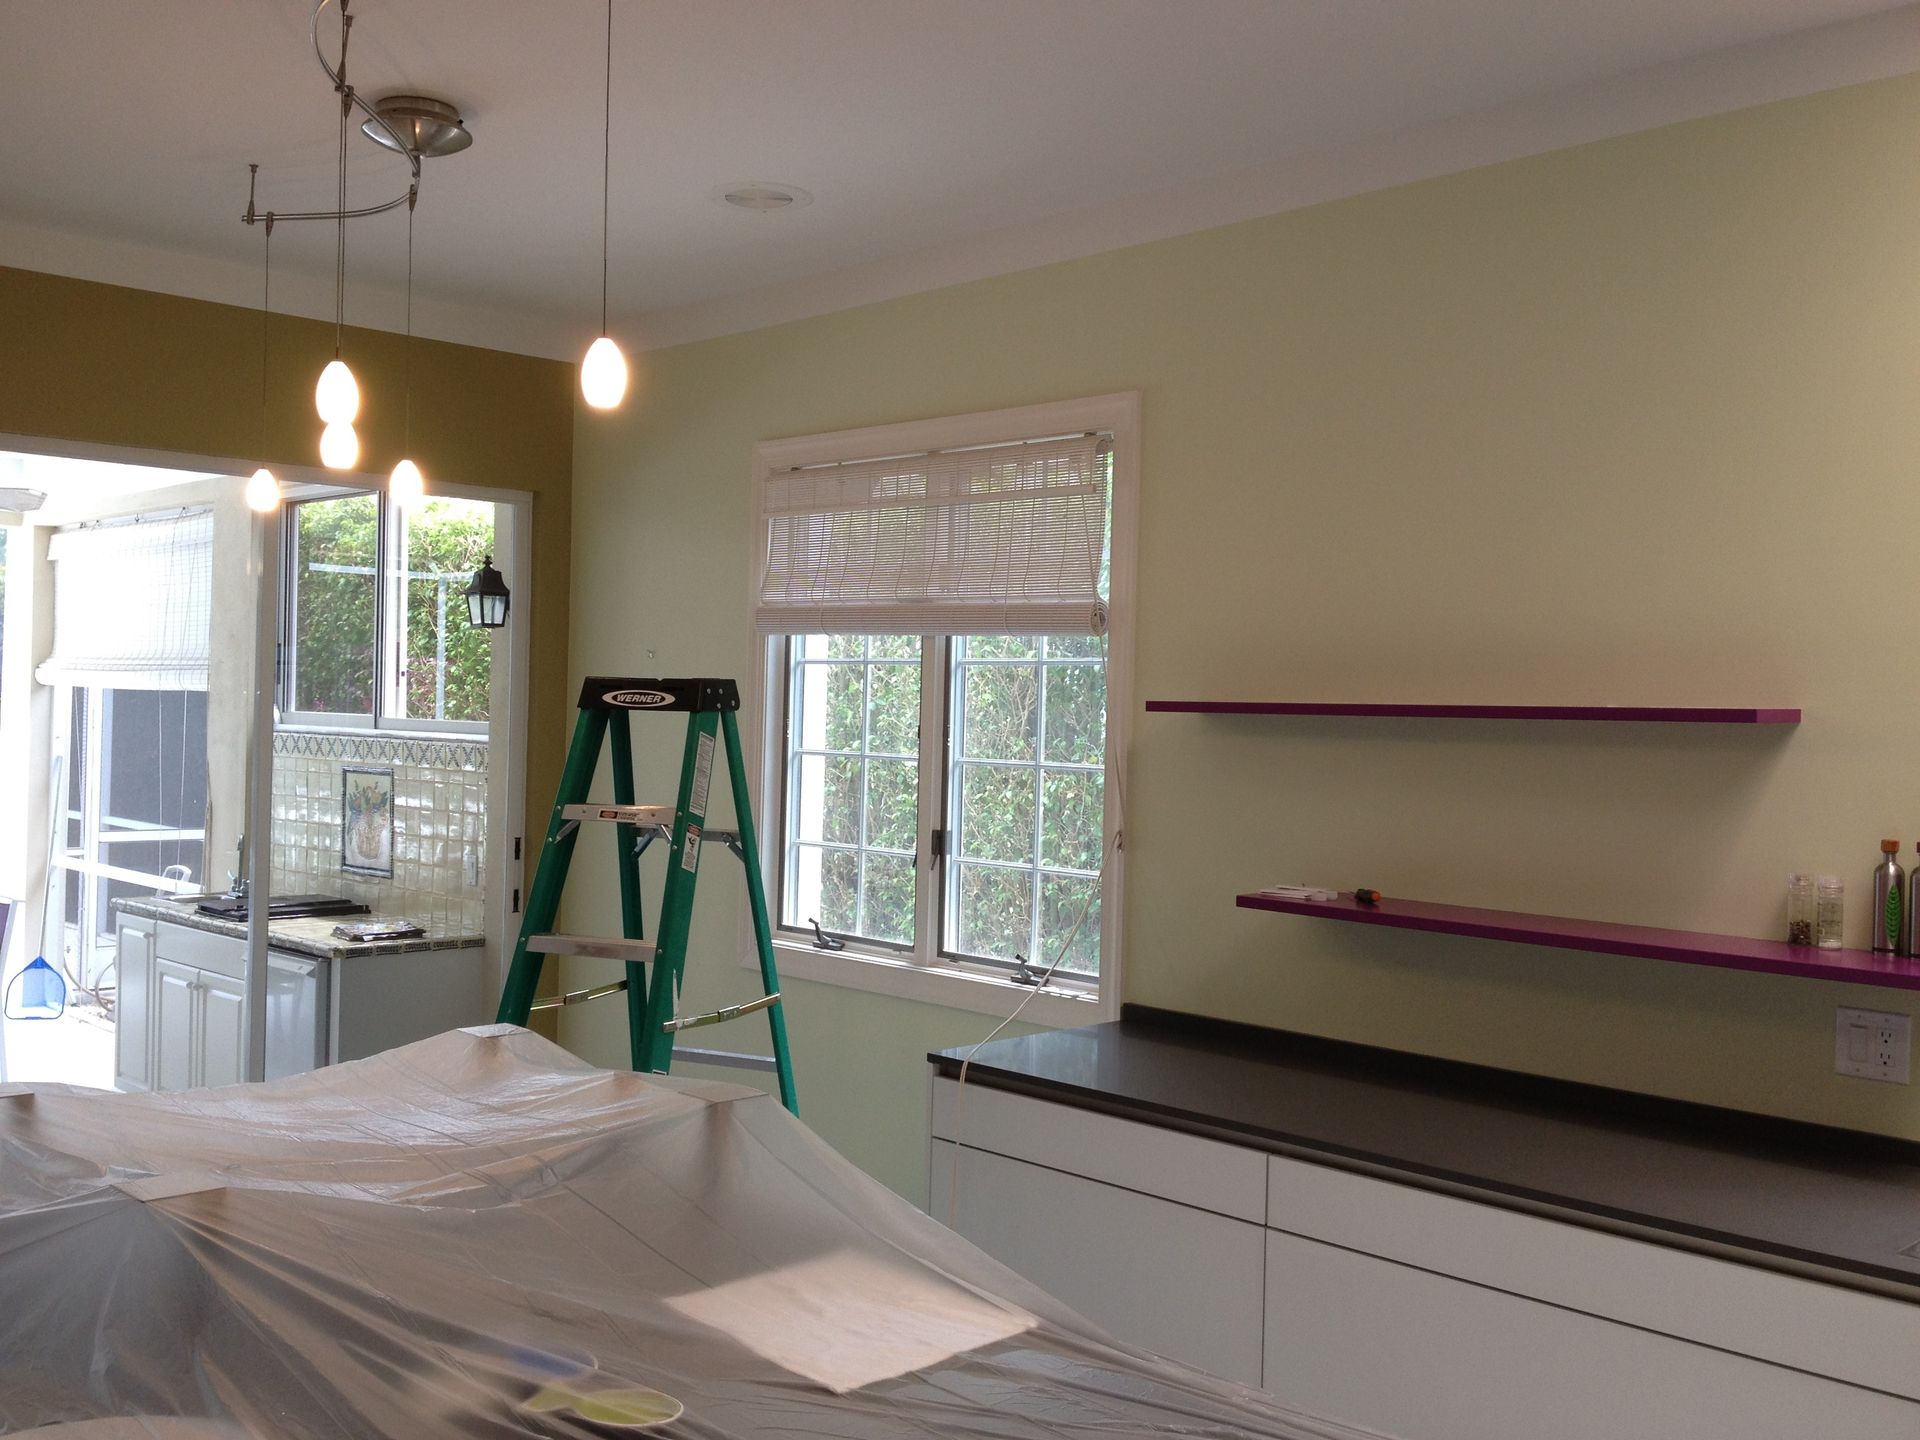 A kitchen with a green ladder and purple shelves